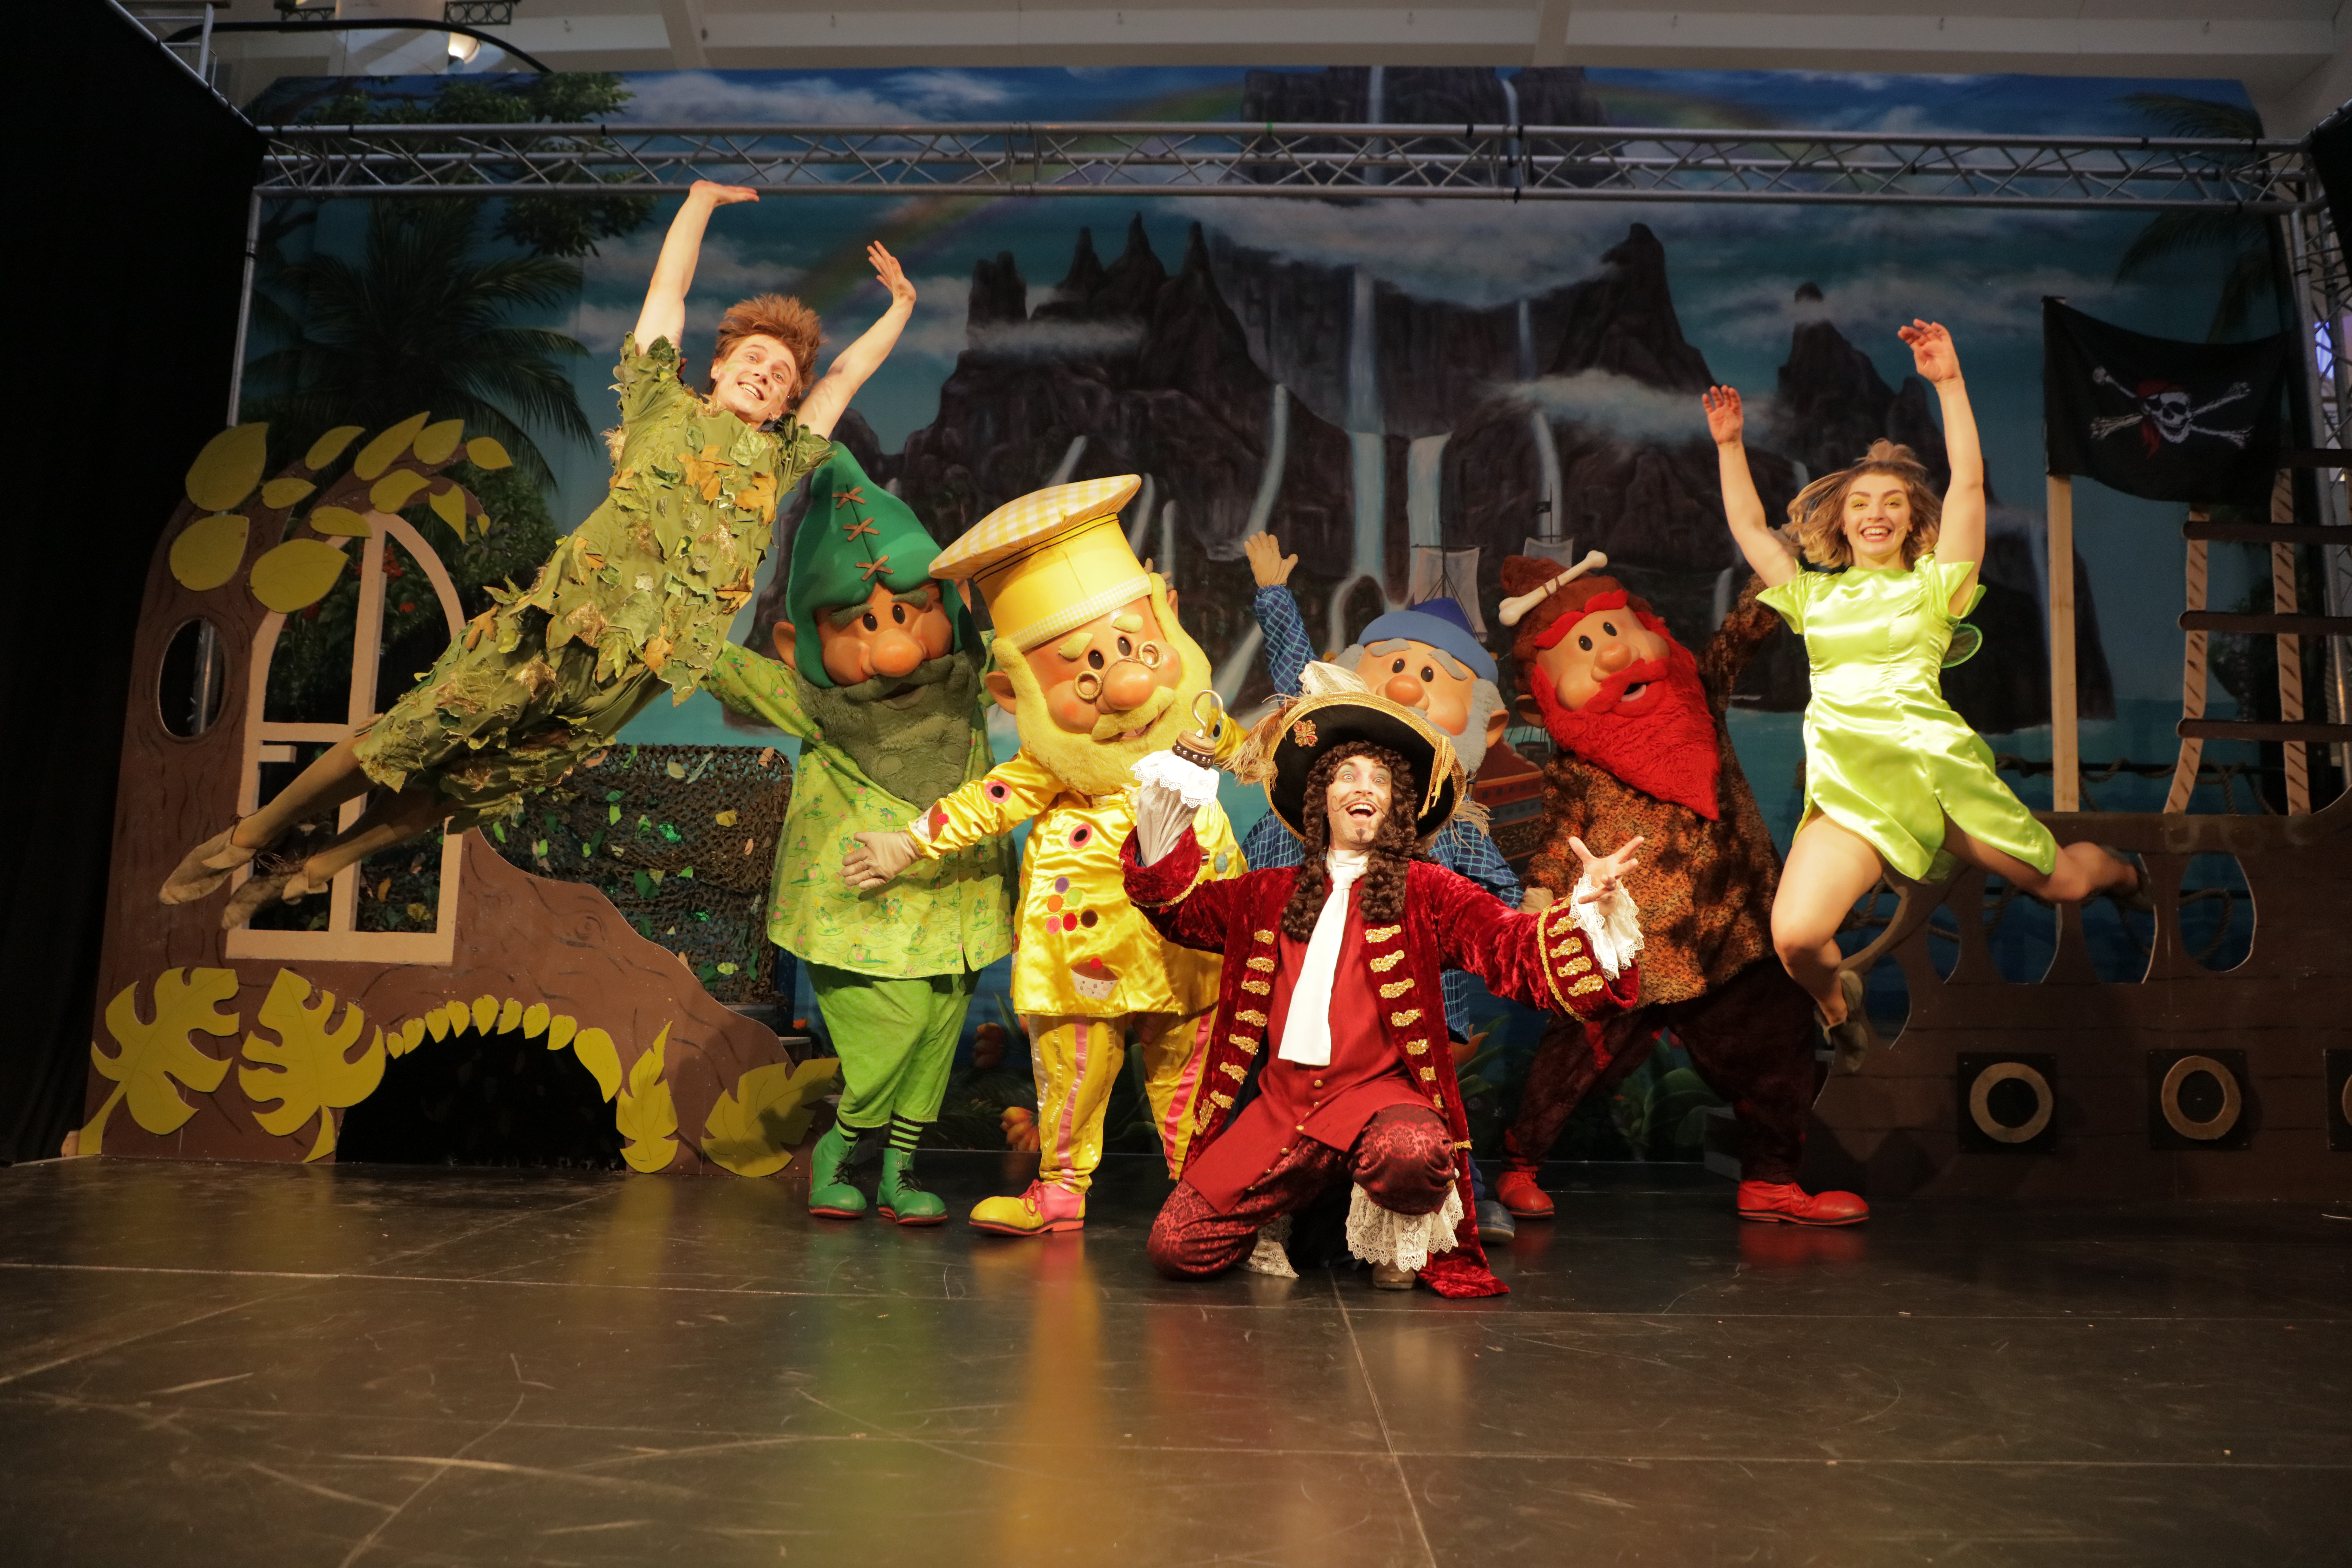 The annual intu MetroCentre Christmas show saw us to the end of the year with Peter Pan, Tinkerbell and Captain Hook.